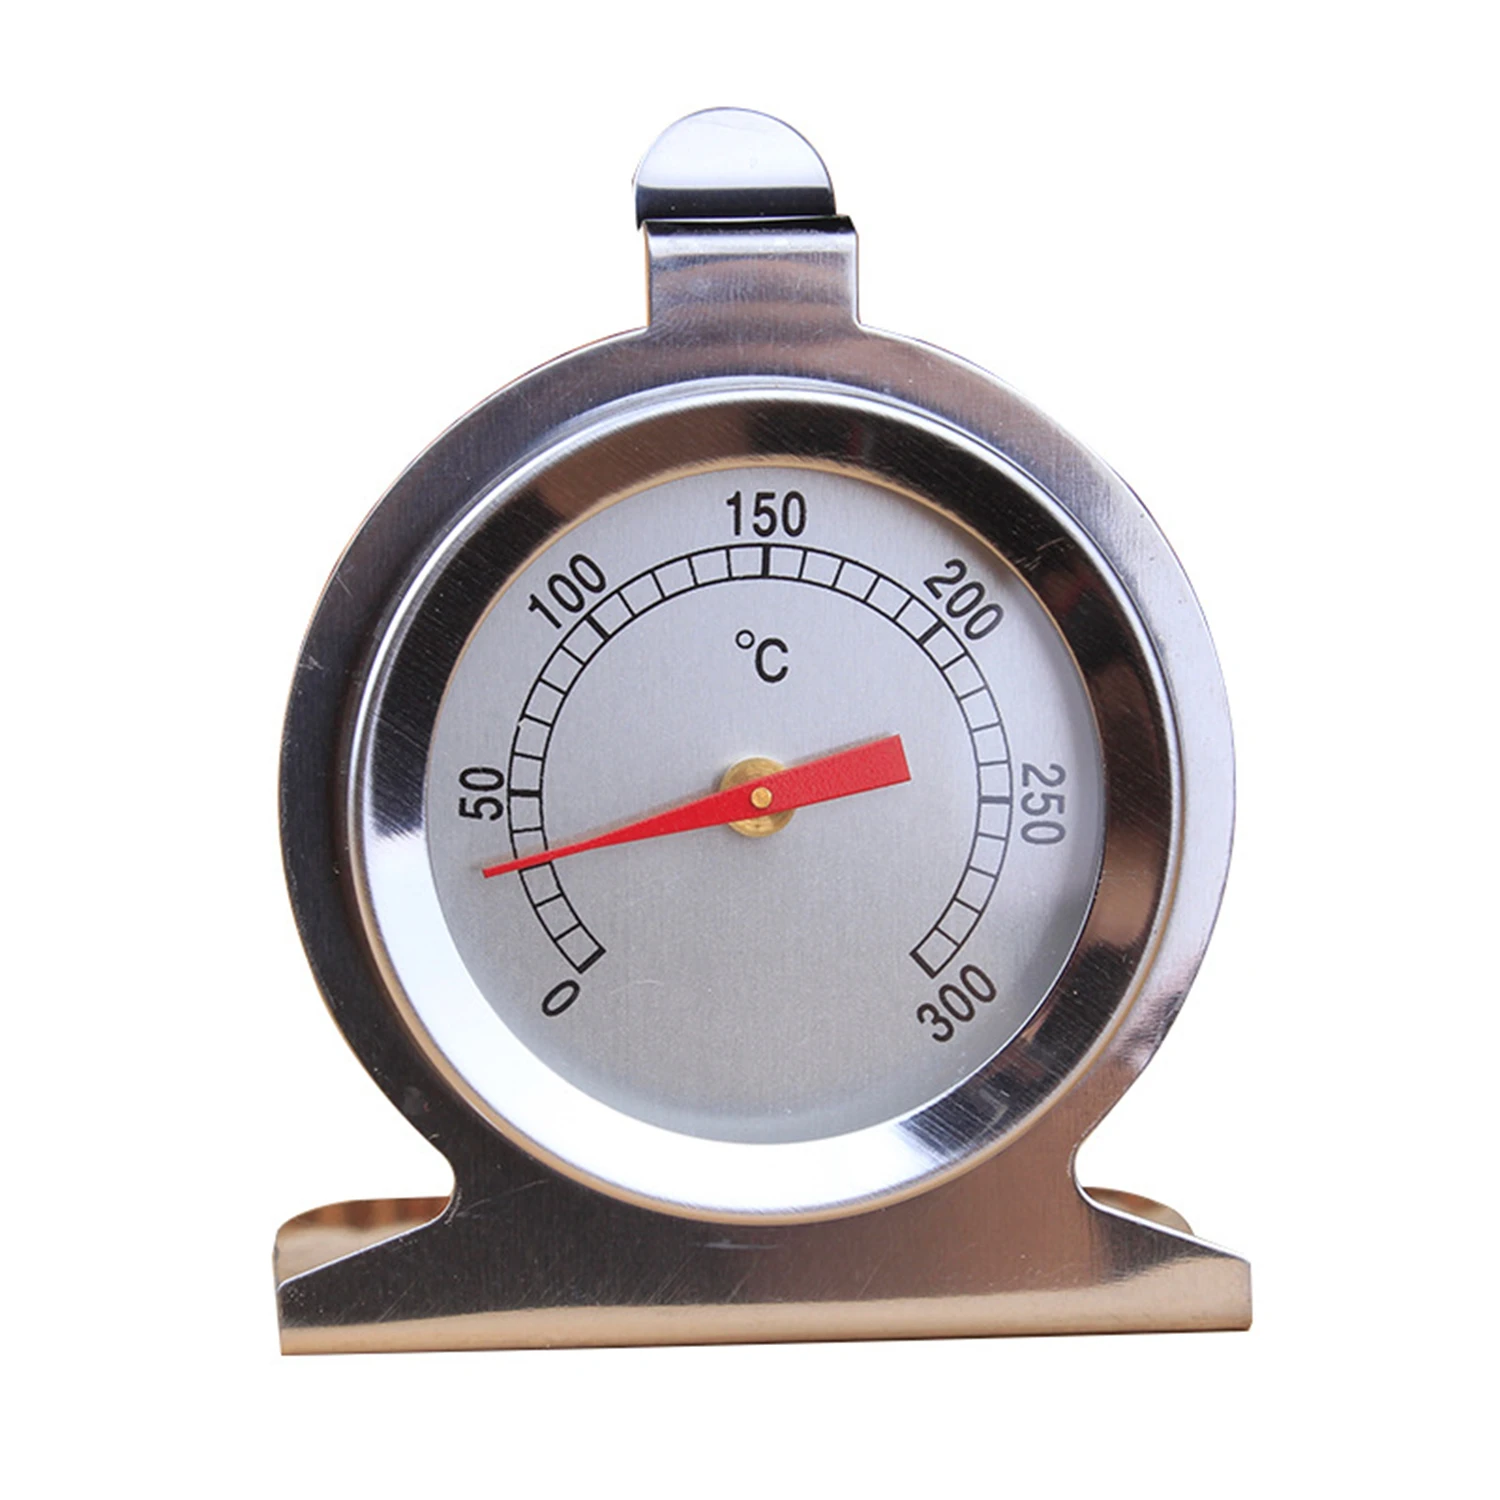 

300°C Stainless Steel Oven Cooker Thermometer Mini Dial Stand Up Temperature Gauge Meter Food Meat Grill Cooking Kitchen Tools